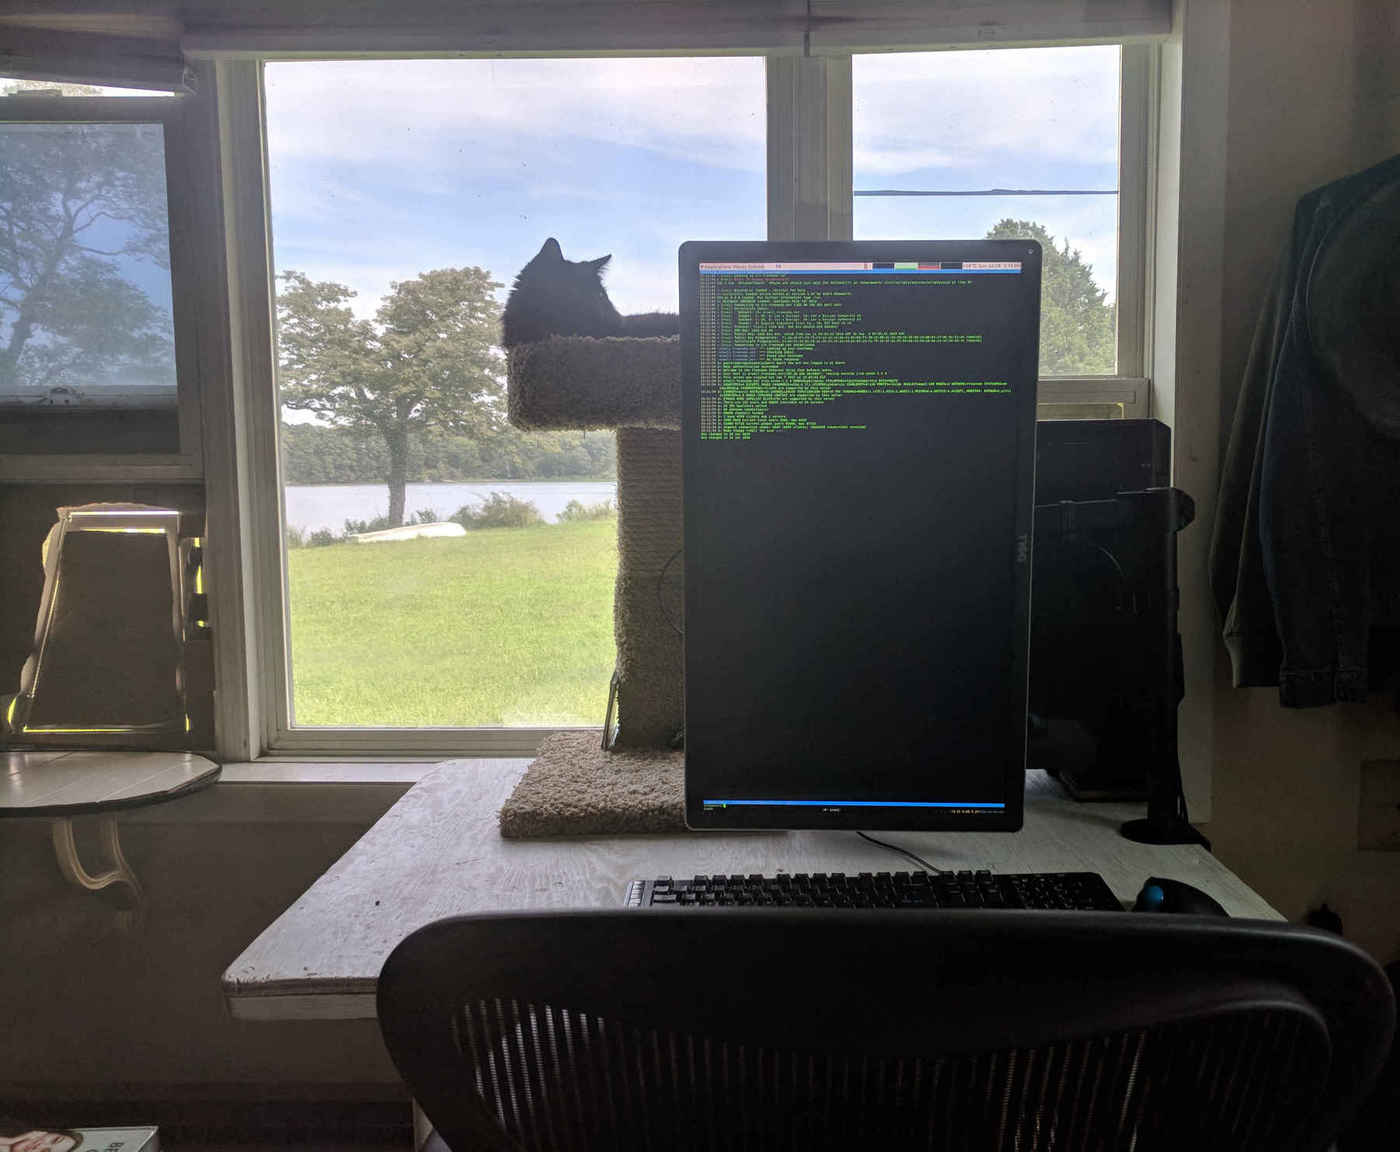 A photo of my workstation & window view as of 2018-07-29, showing the used Aeron chair, Dell monitor in portrait mode, and the workstation; sleeping in the cat tree is my cat.